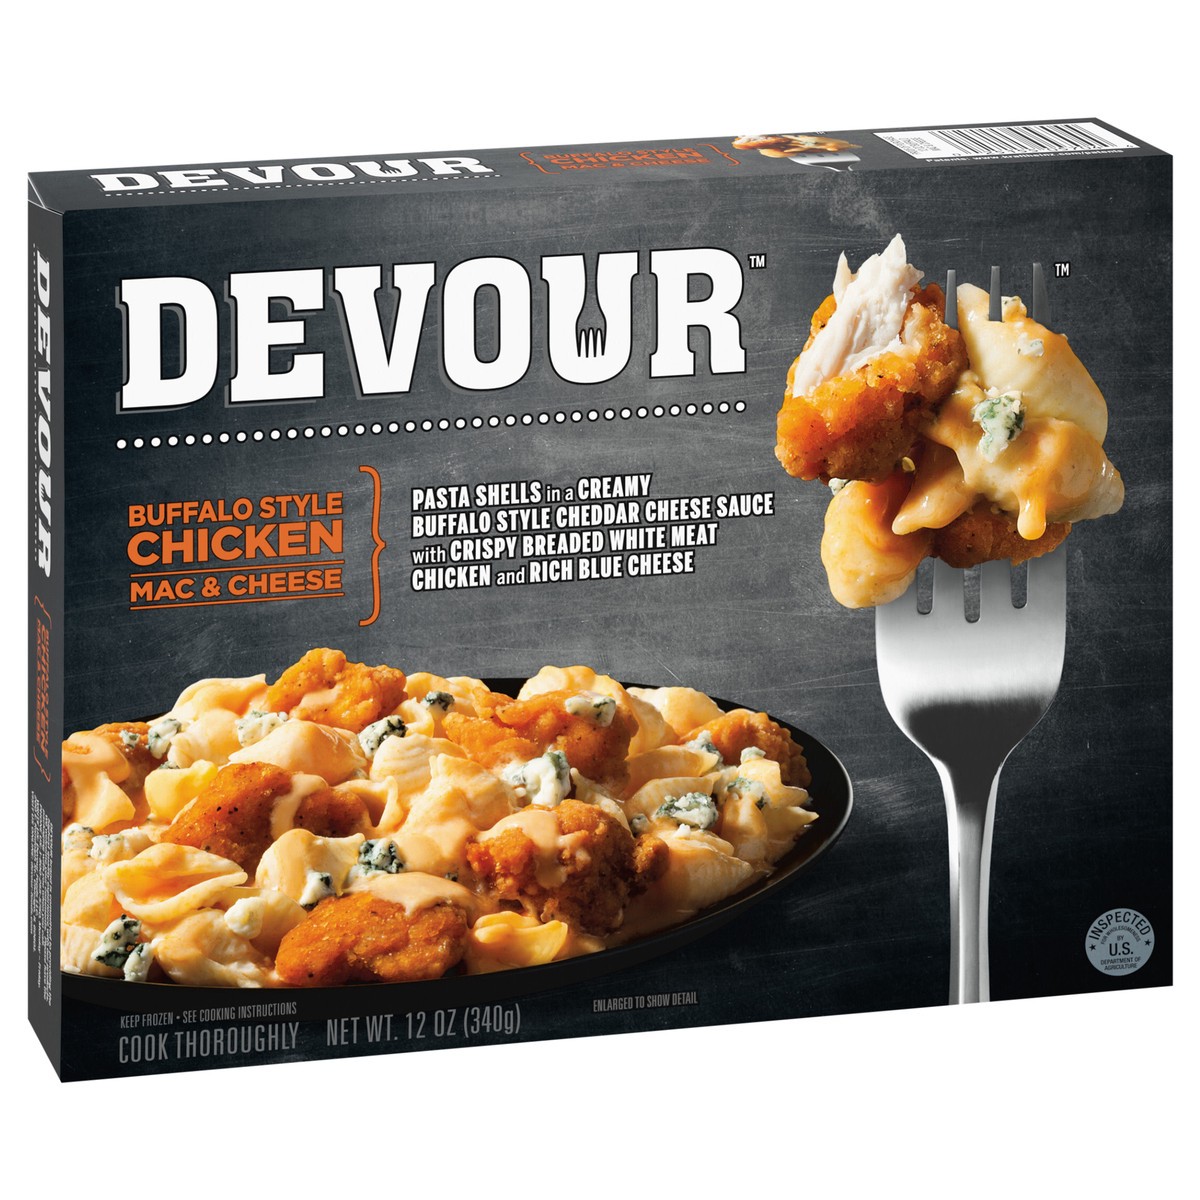 slide 8 of 9, DEVOUR Buffalo Style Chicken Mac & Cheese with Buffalo Cheddar Cheese Sauce & Blue Cheese Frozen Meal, 12 oz Box, 12 oz